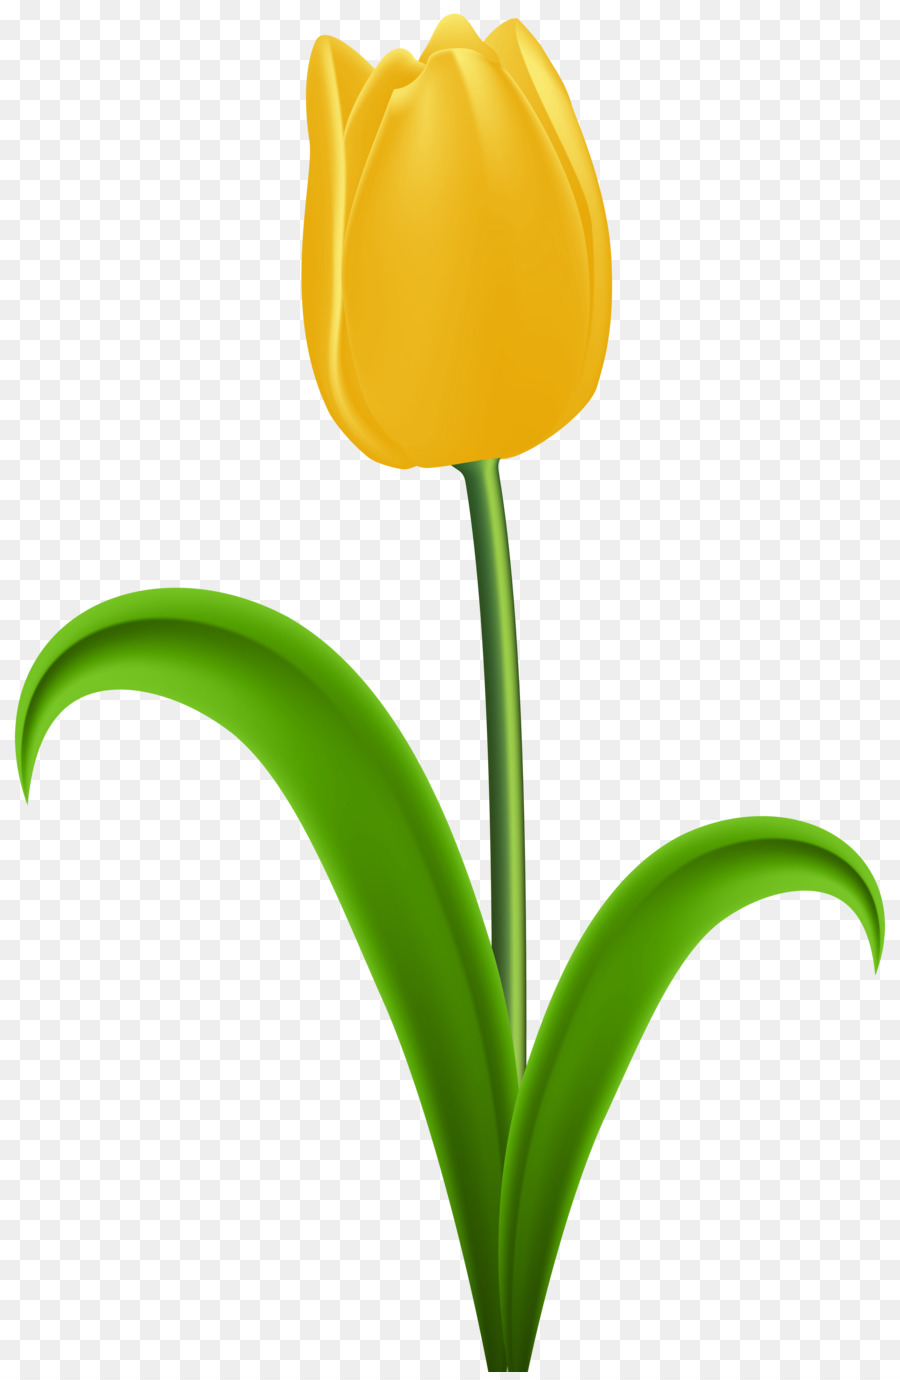 Tulip Yellow Flower Clip art - tulips png download - 5248*8000 - Free Transparent Tulip png Download.